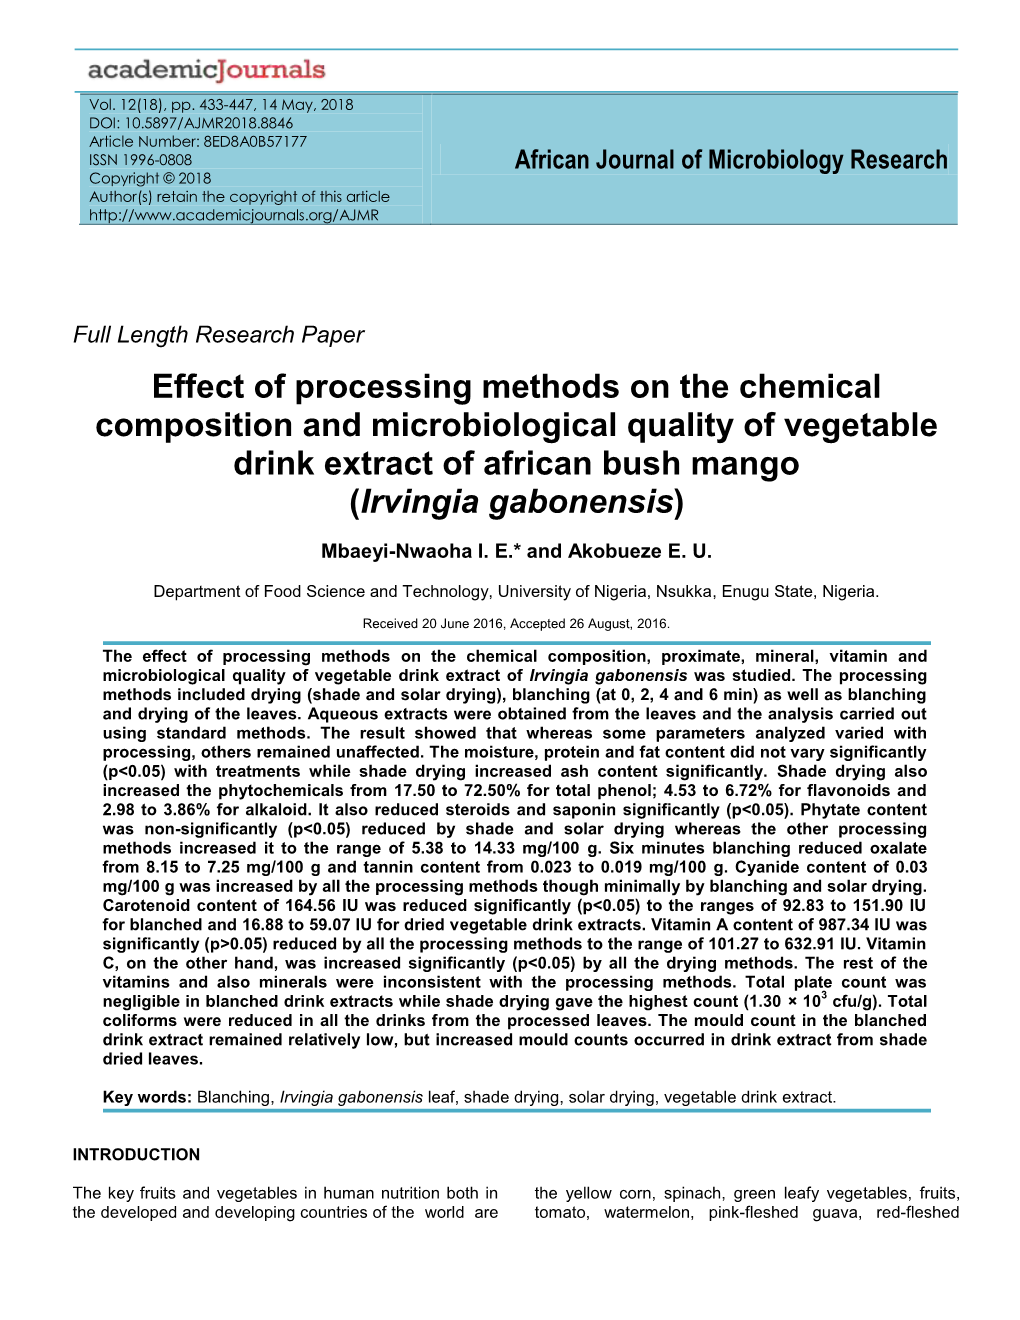 Effect of Processing Methods on the Chemical Composition and Microbiological Quality of Vegetable Drink Extract of African Bush Mango (Irvingia Gabonensis)